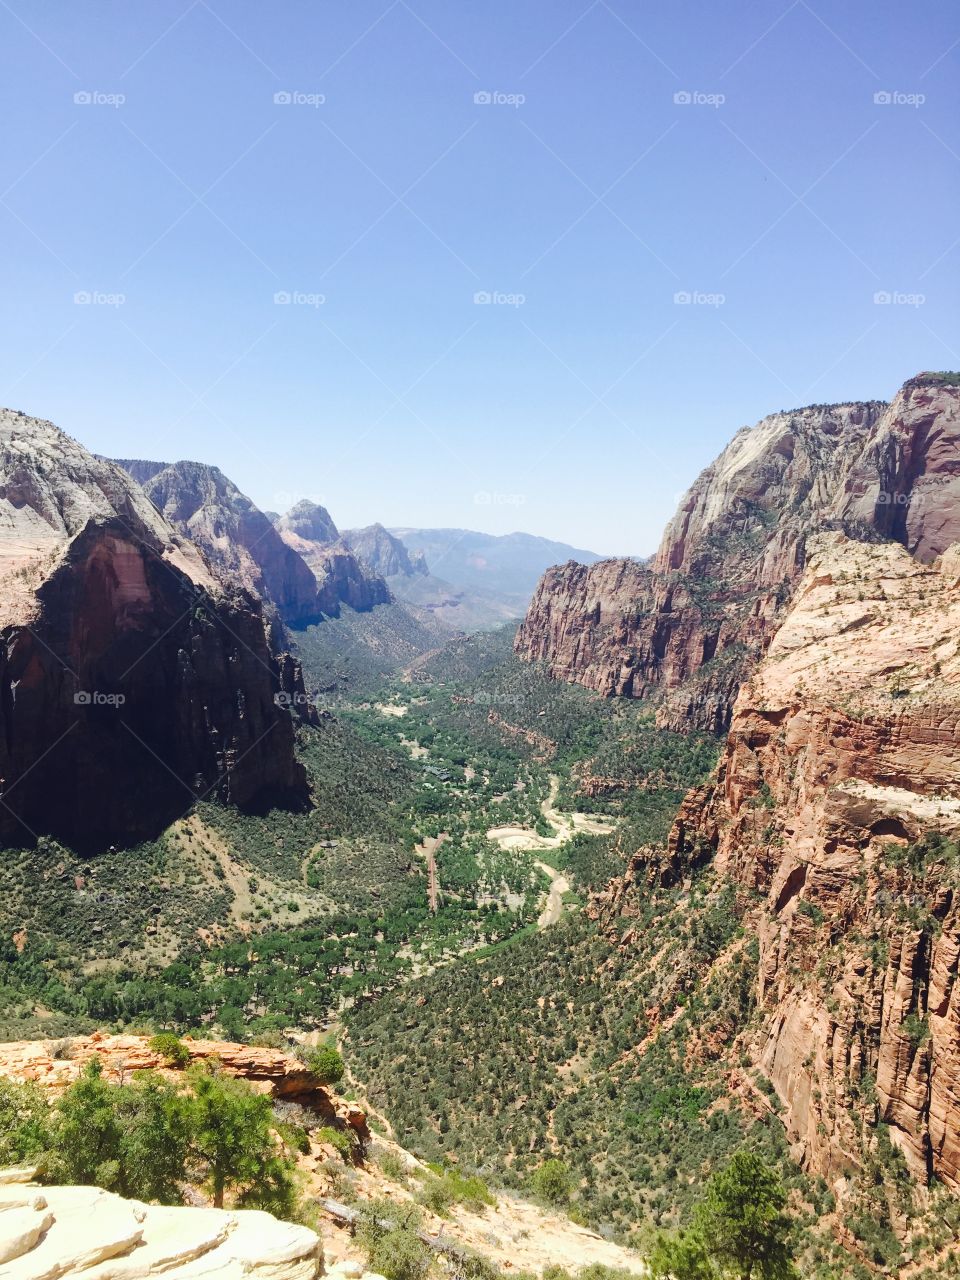 Angel's Landing View. The beautiful view from Angel's landing. 